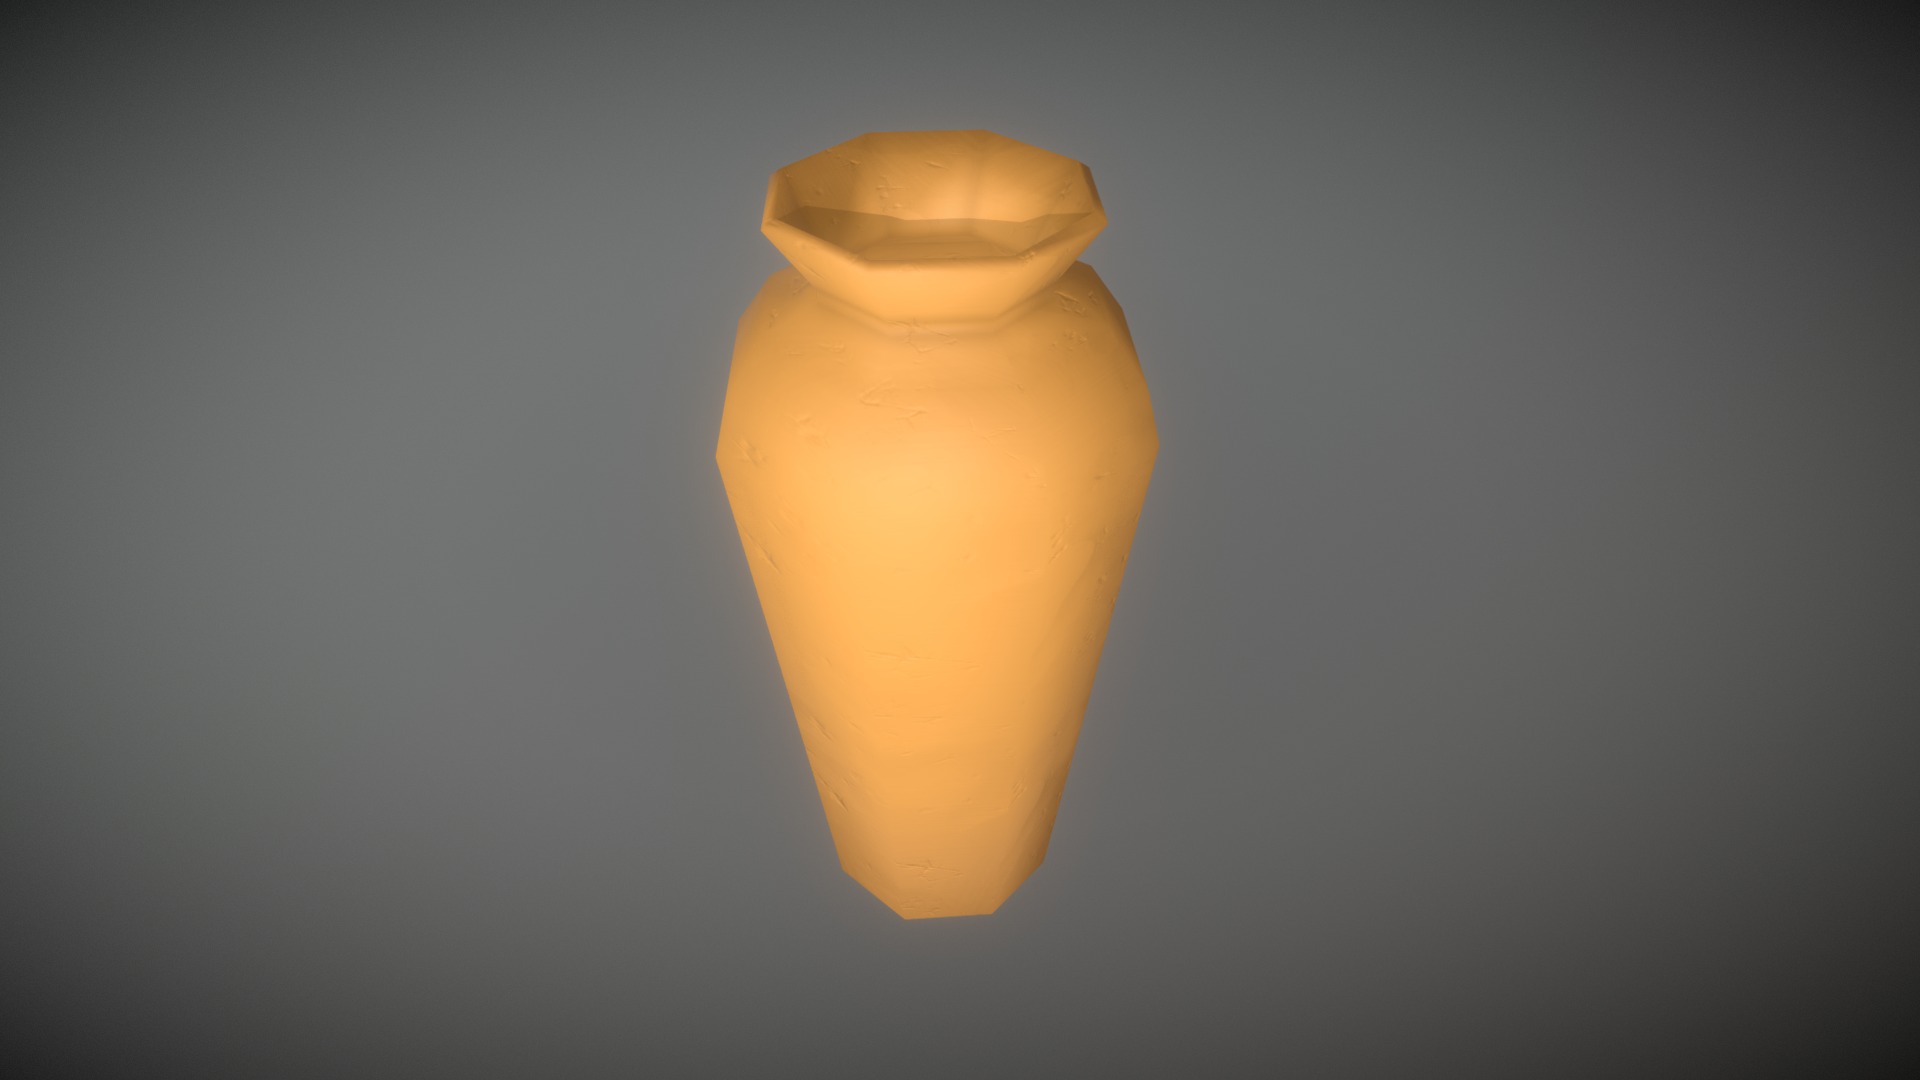 3D model Game Ready Small Clay Vase low-poly - This is a 3D model of the Game Ready Small Clay Vase low-poly. The 3D model is about a yellow light bulb.